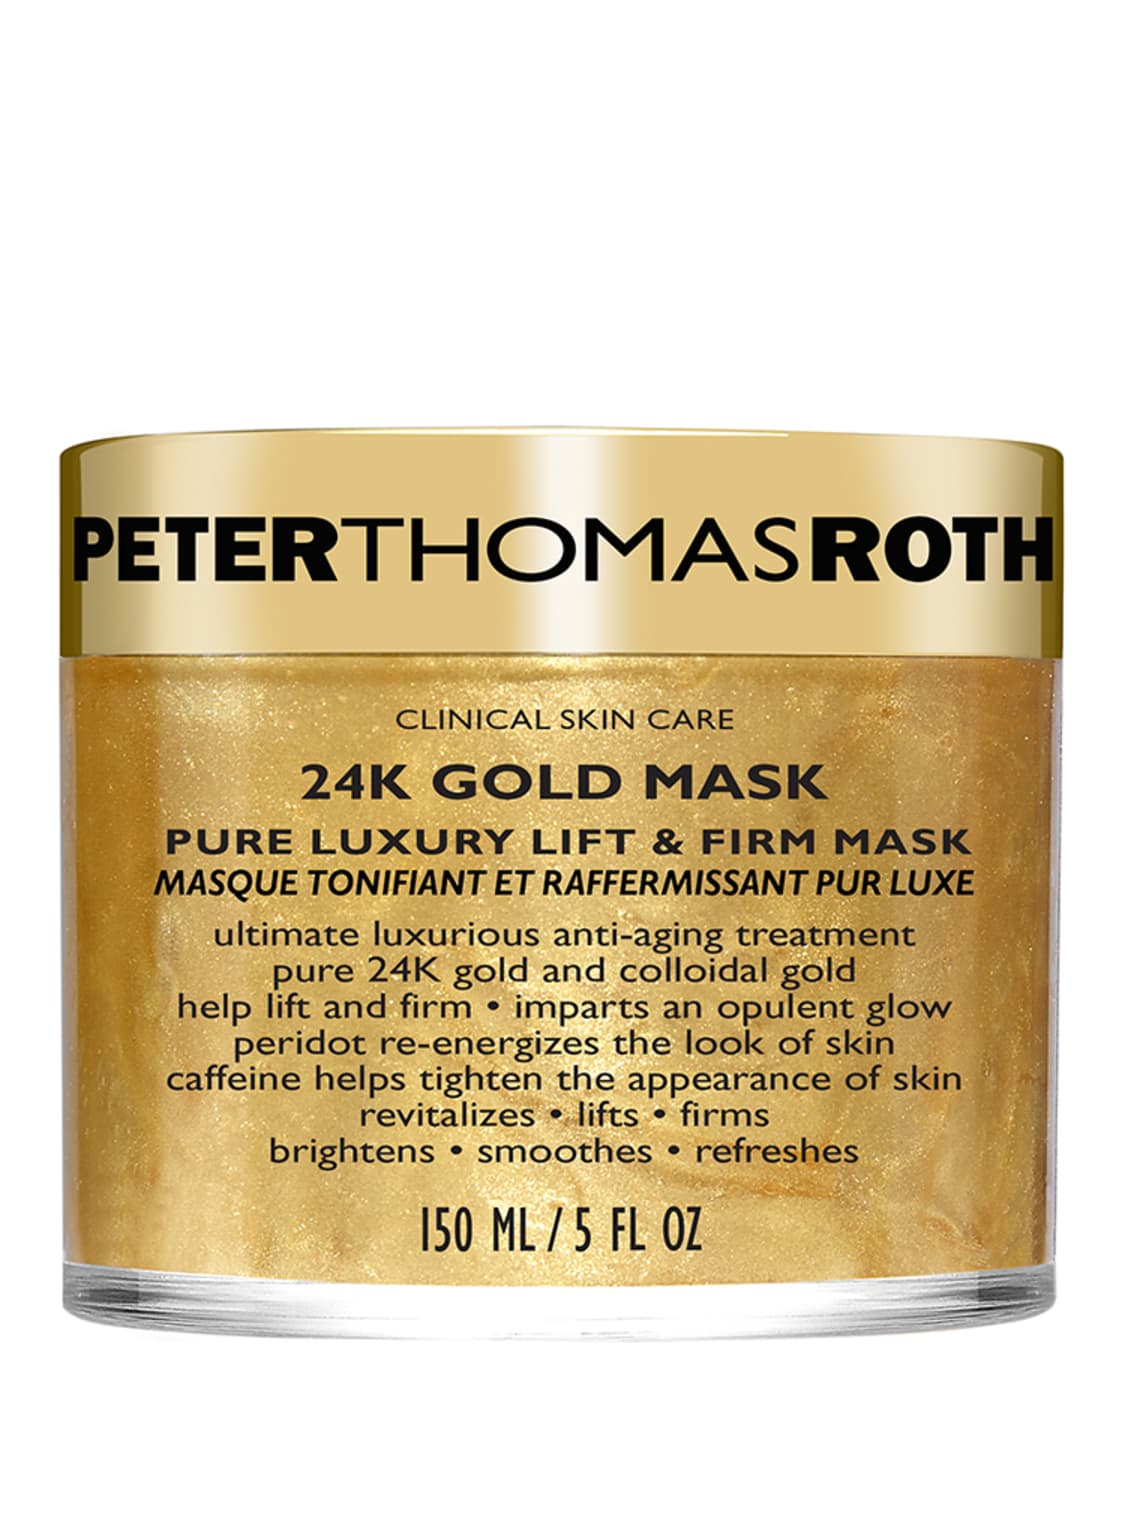 Image of Peter Thomas Roth 24k Gold Mask Lift Pure Luxury Lift & Firm Mask 150 ml